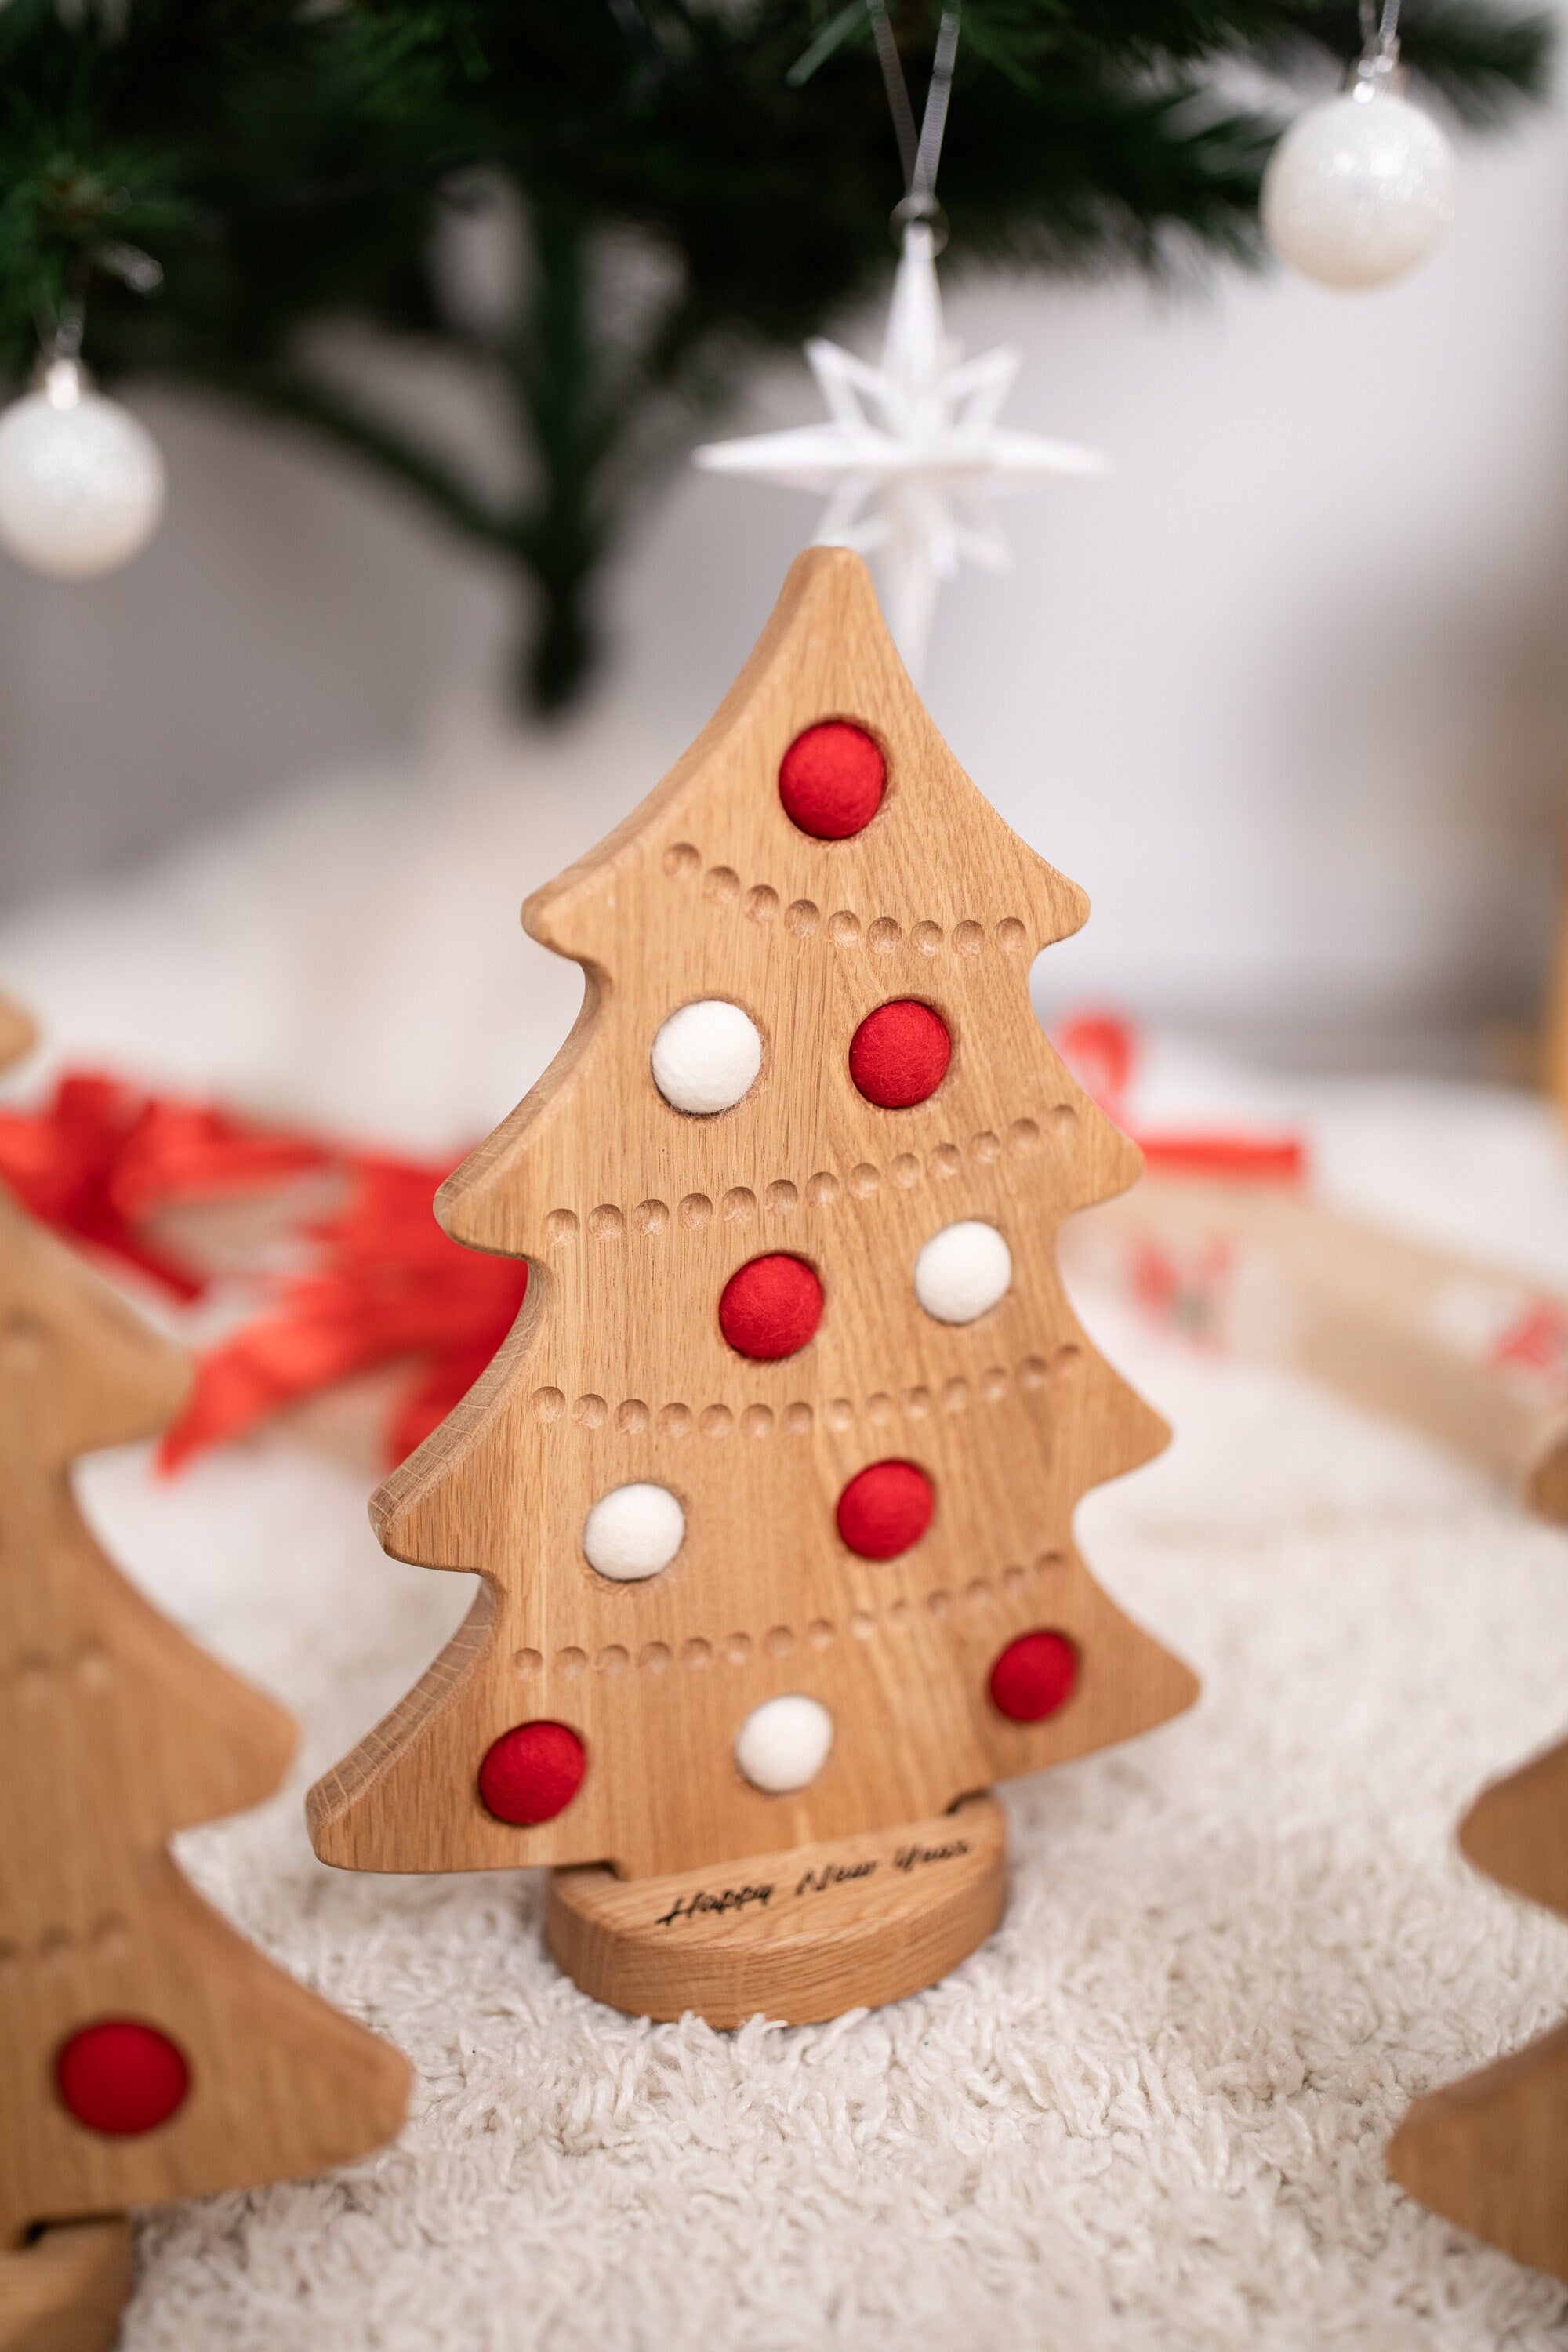 Christmas tree gifts for kids and adults personalized gifts for him for her for parents wooden Christmas decorations home decor